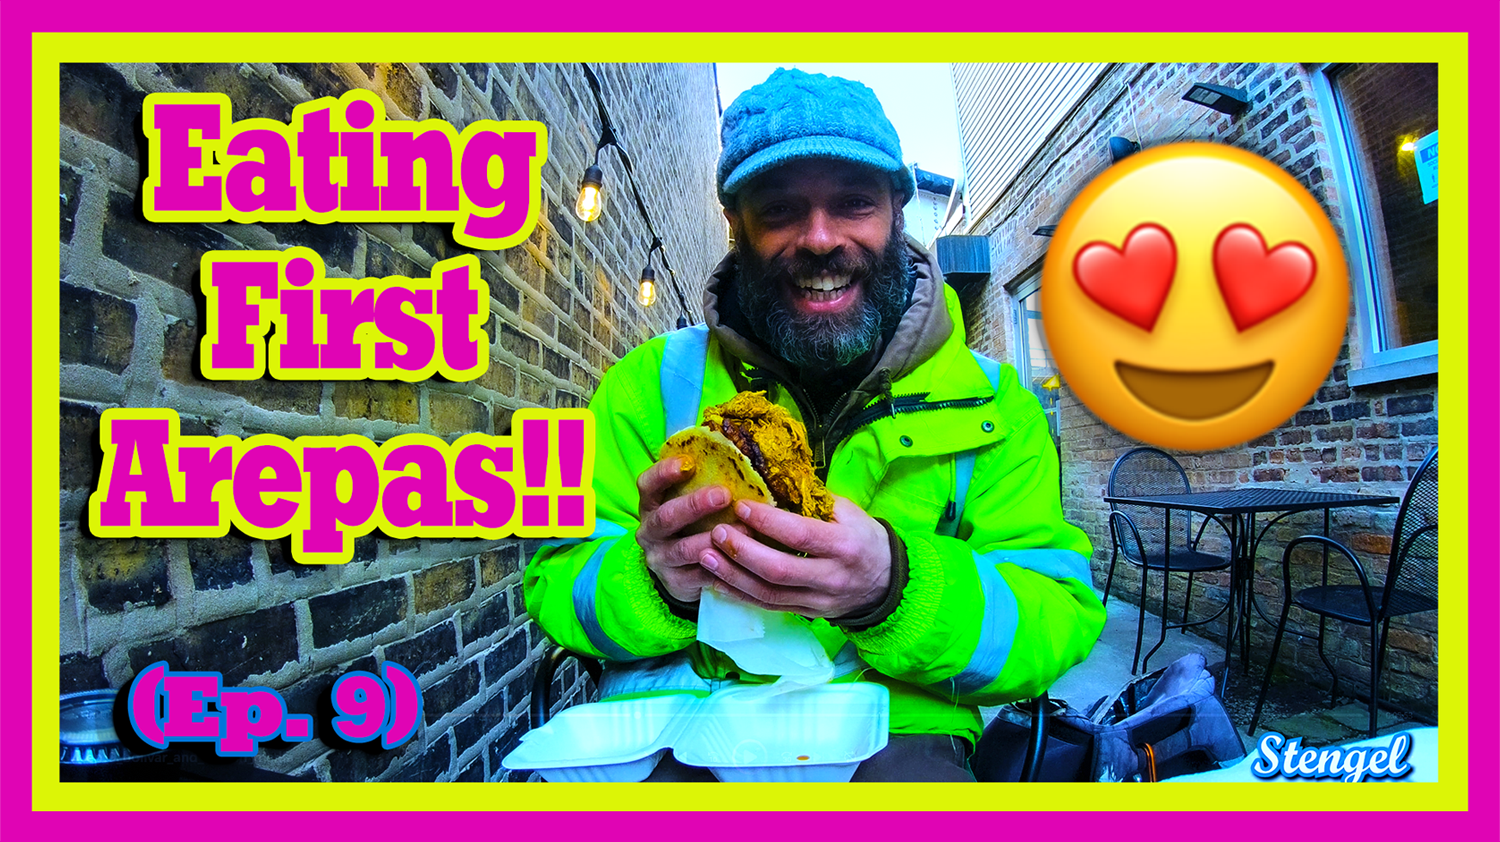 (Ep. 9) Eating First Arepas!!